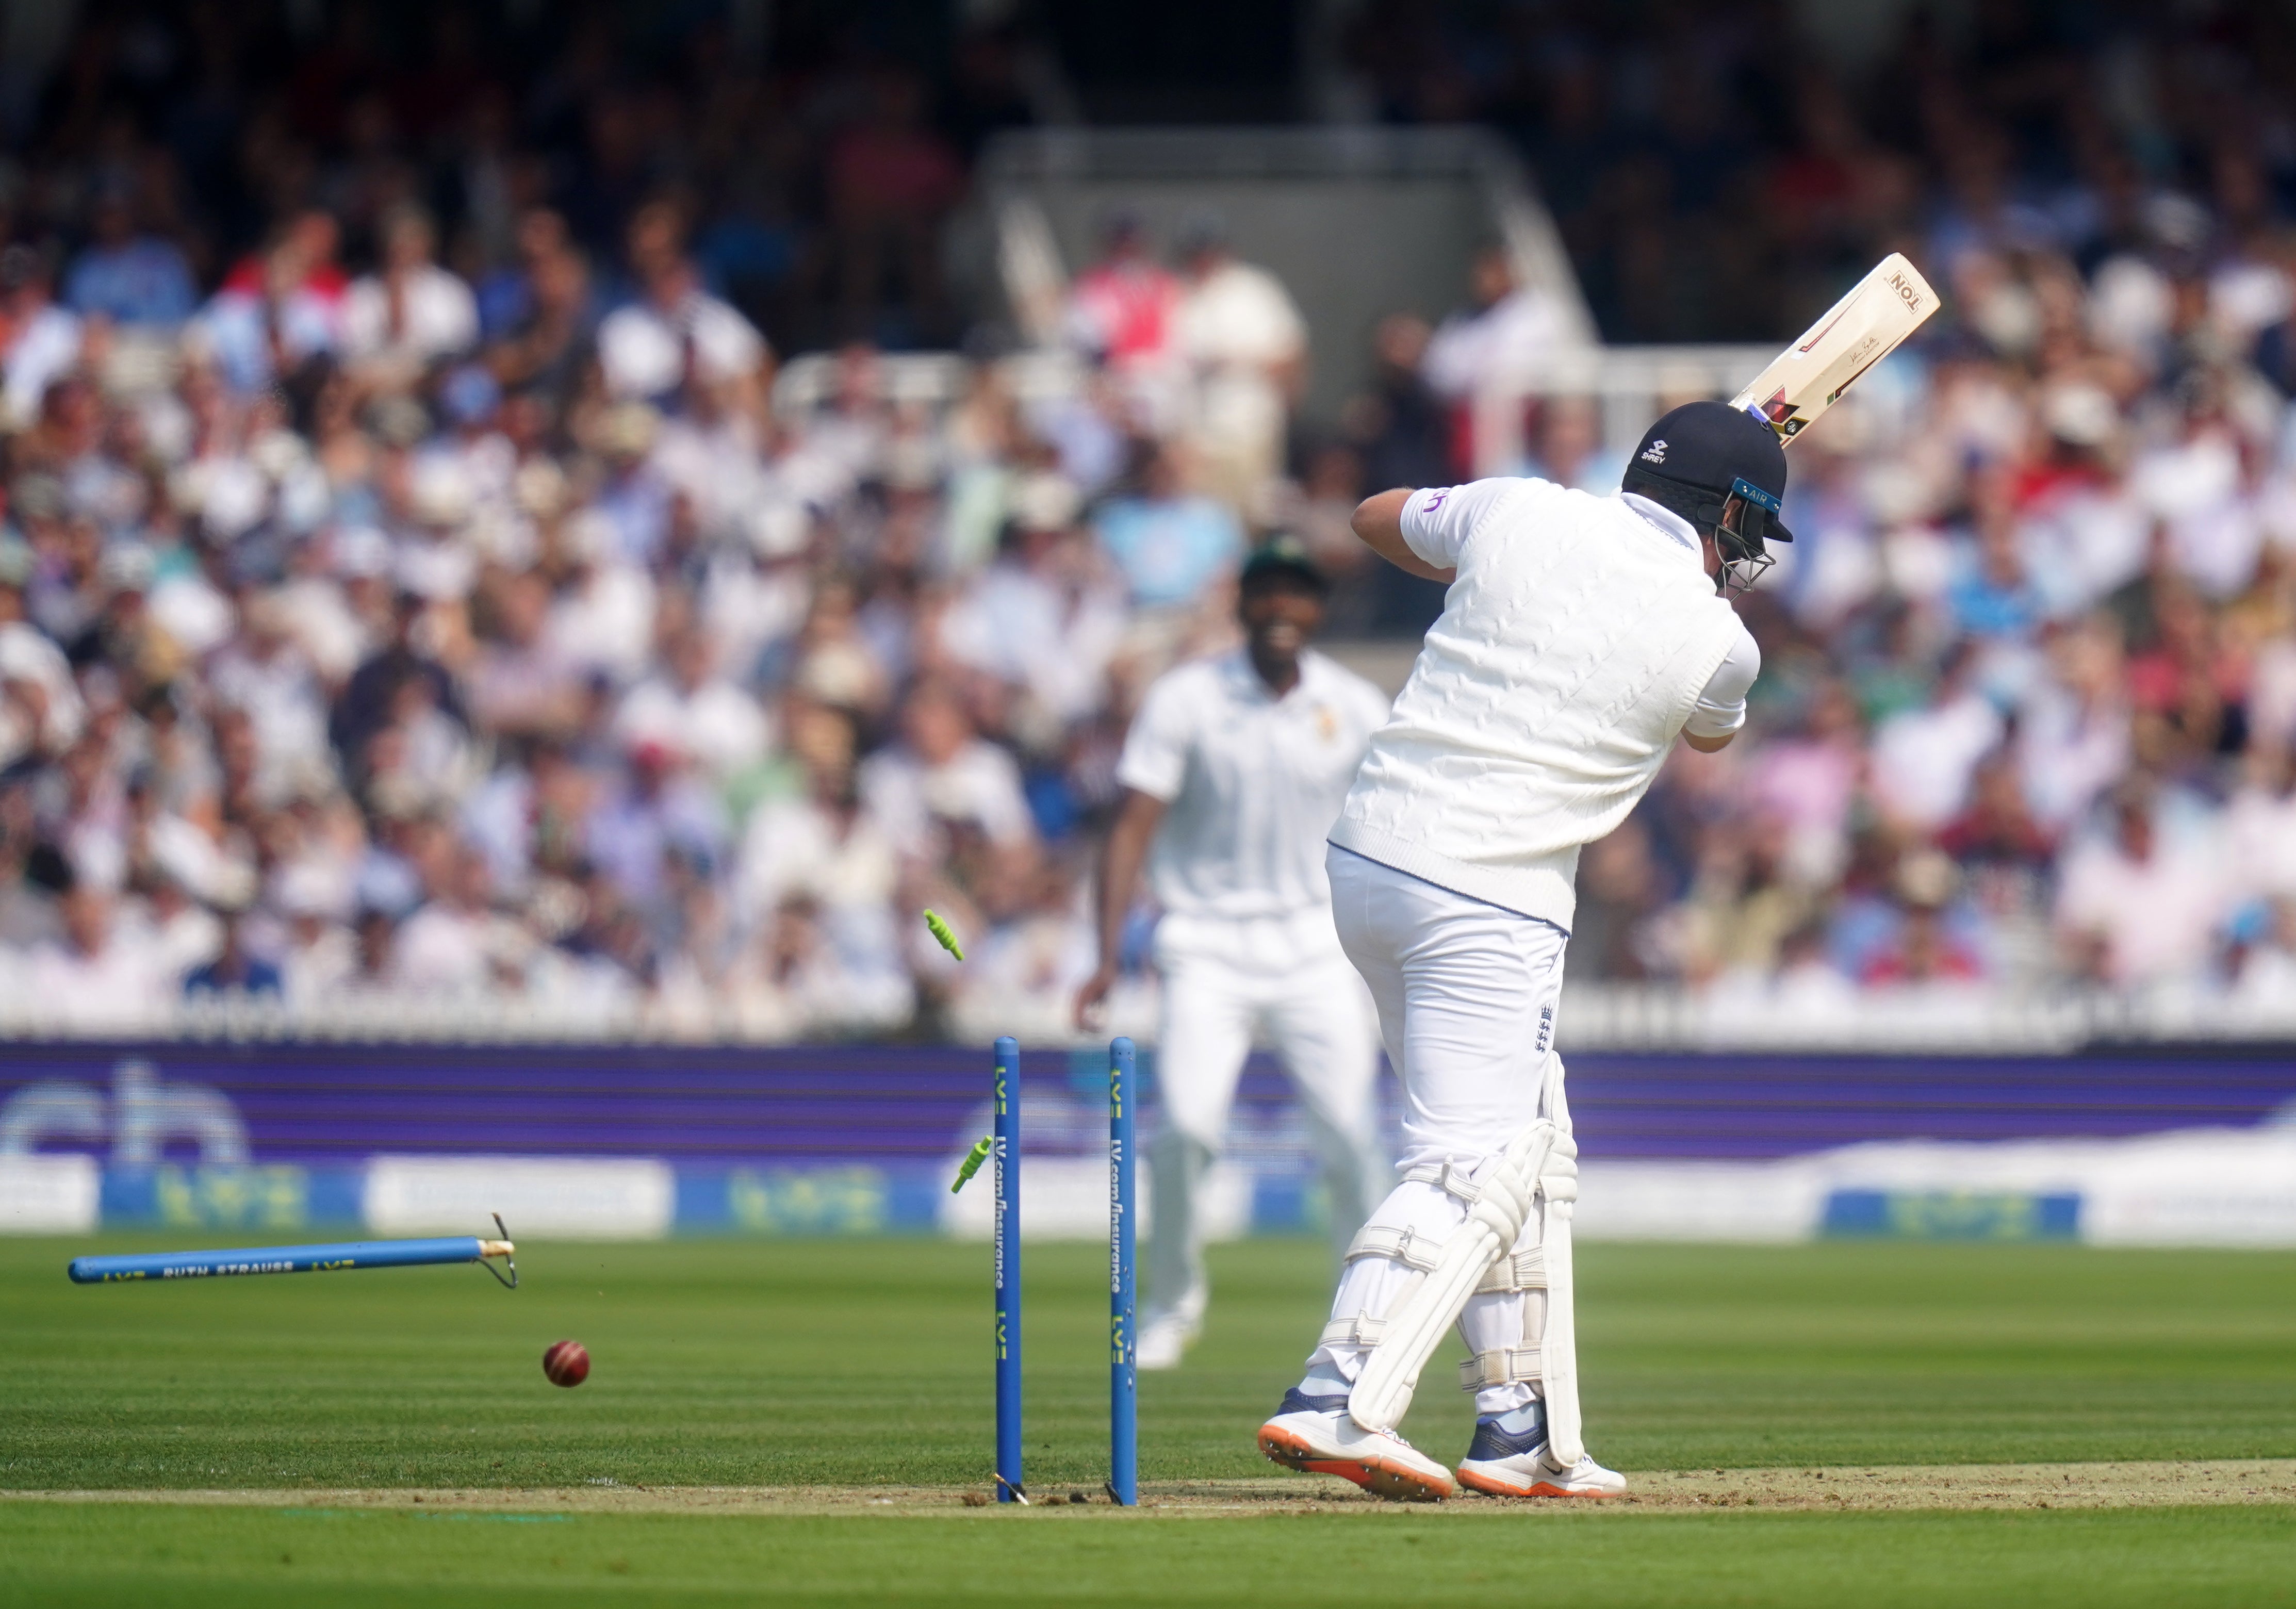 England’s Jonny Bairstow was bowled for a duck by South Africa’s Anrich Nortje (Adam Davy/PA)